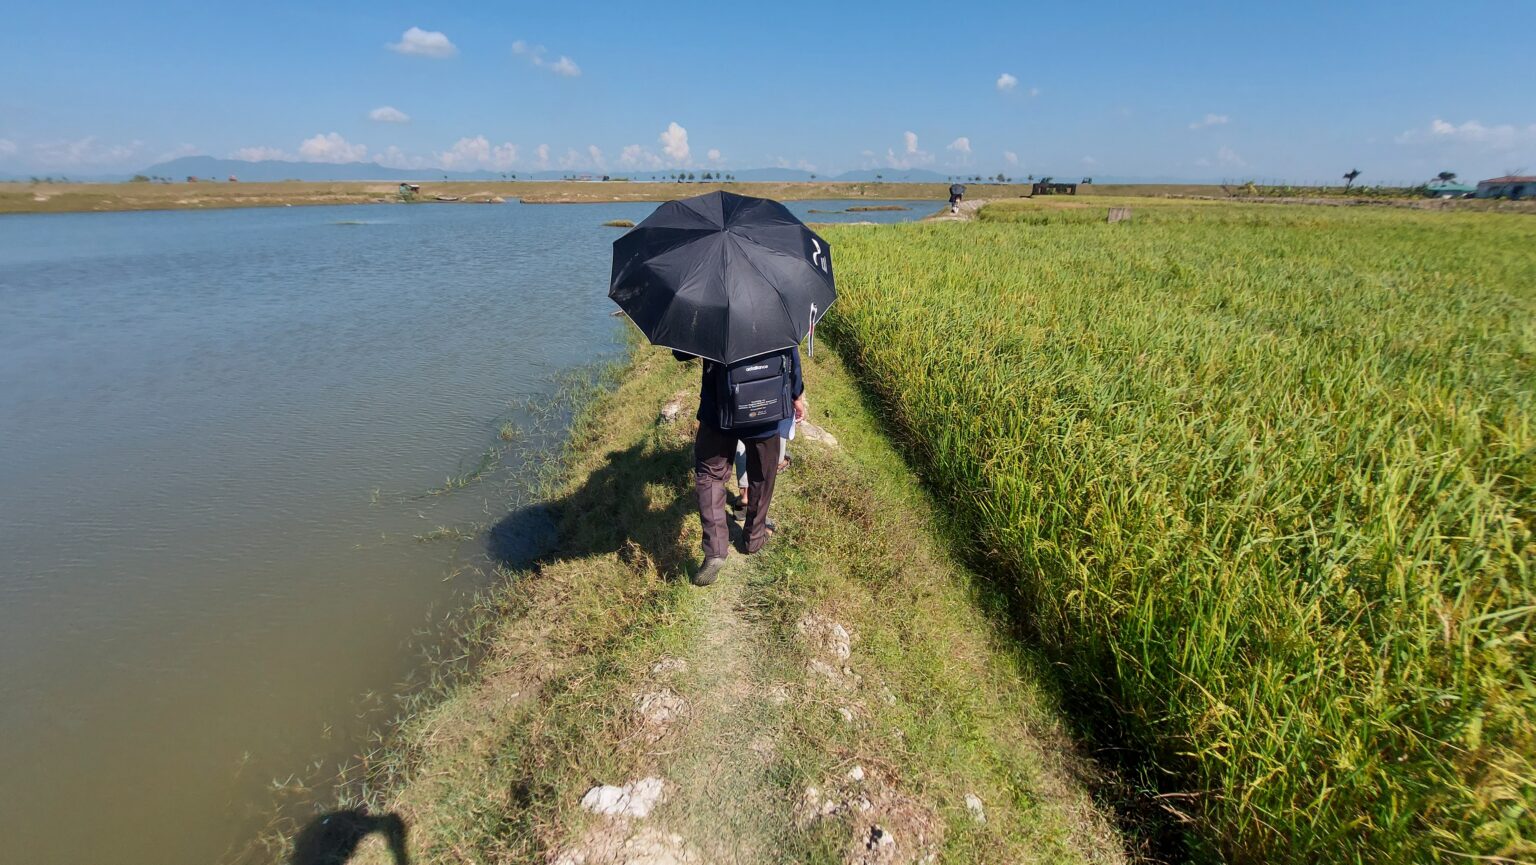 Farmers grow rice on the edge of the ocean. On the left of this dike is water almost as salty as the ocean, while on the right is rice grown in fresh water.